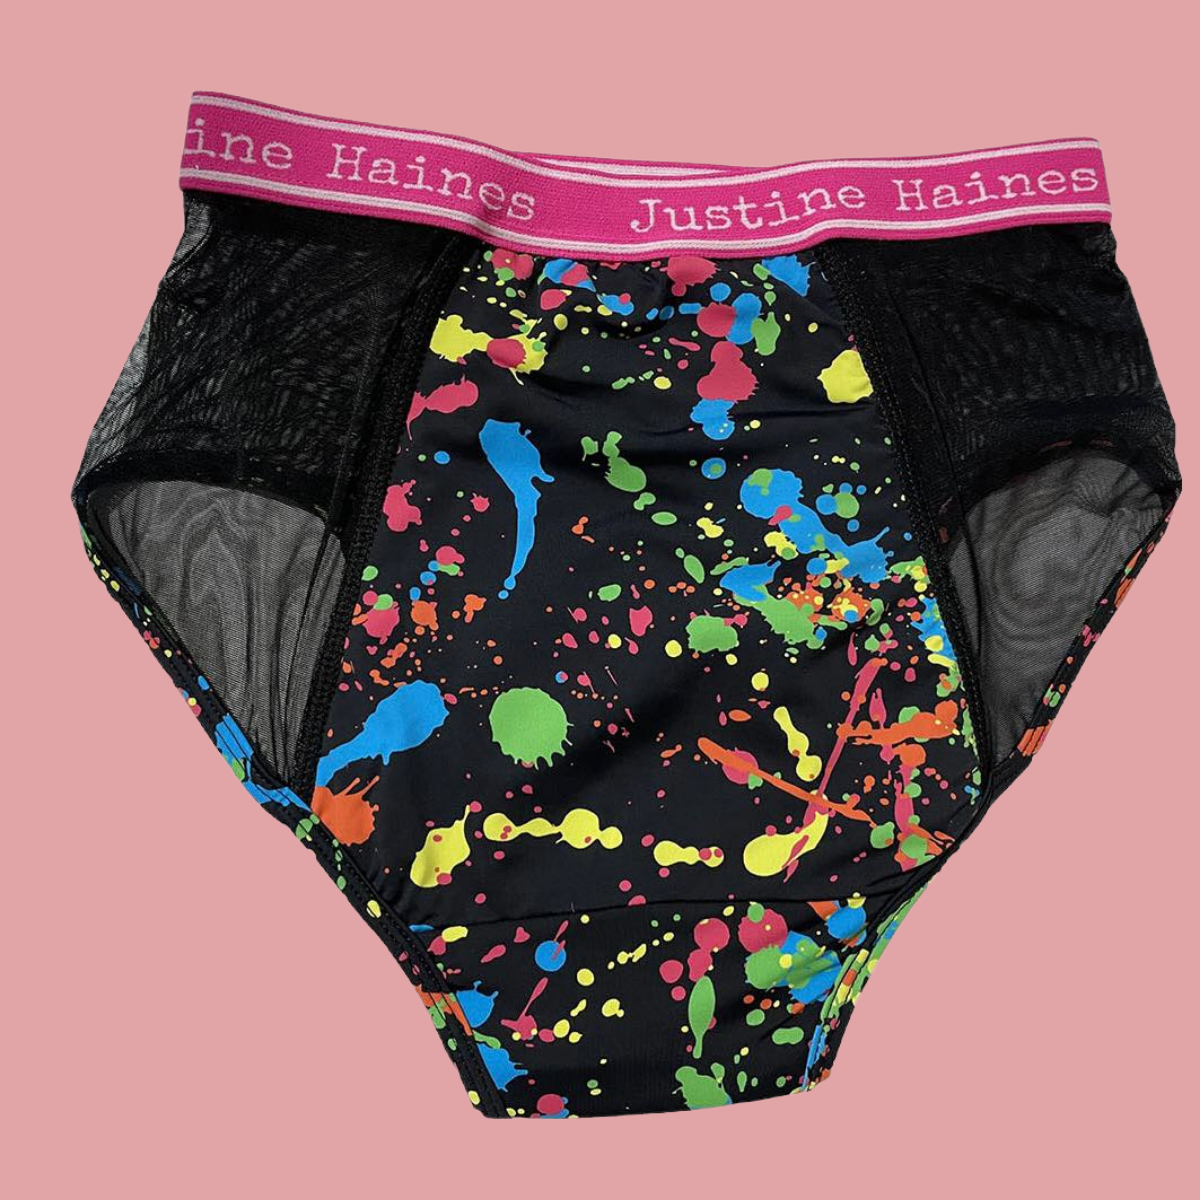 https://www.justinehaines.com/products/highrise-briefs-with-side-peek-a-boo-see-through-mesh-in-80s-neon-paint